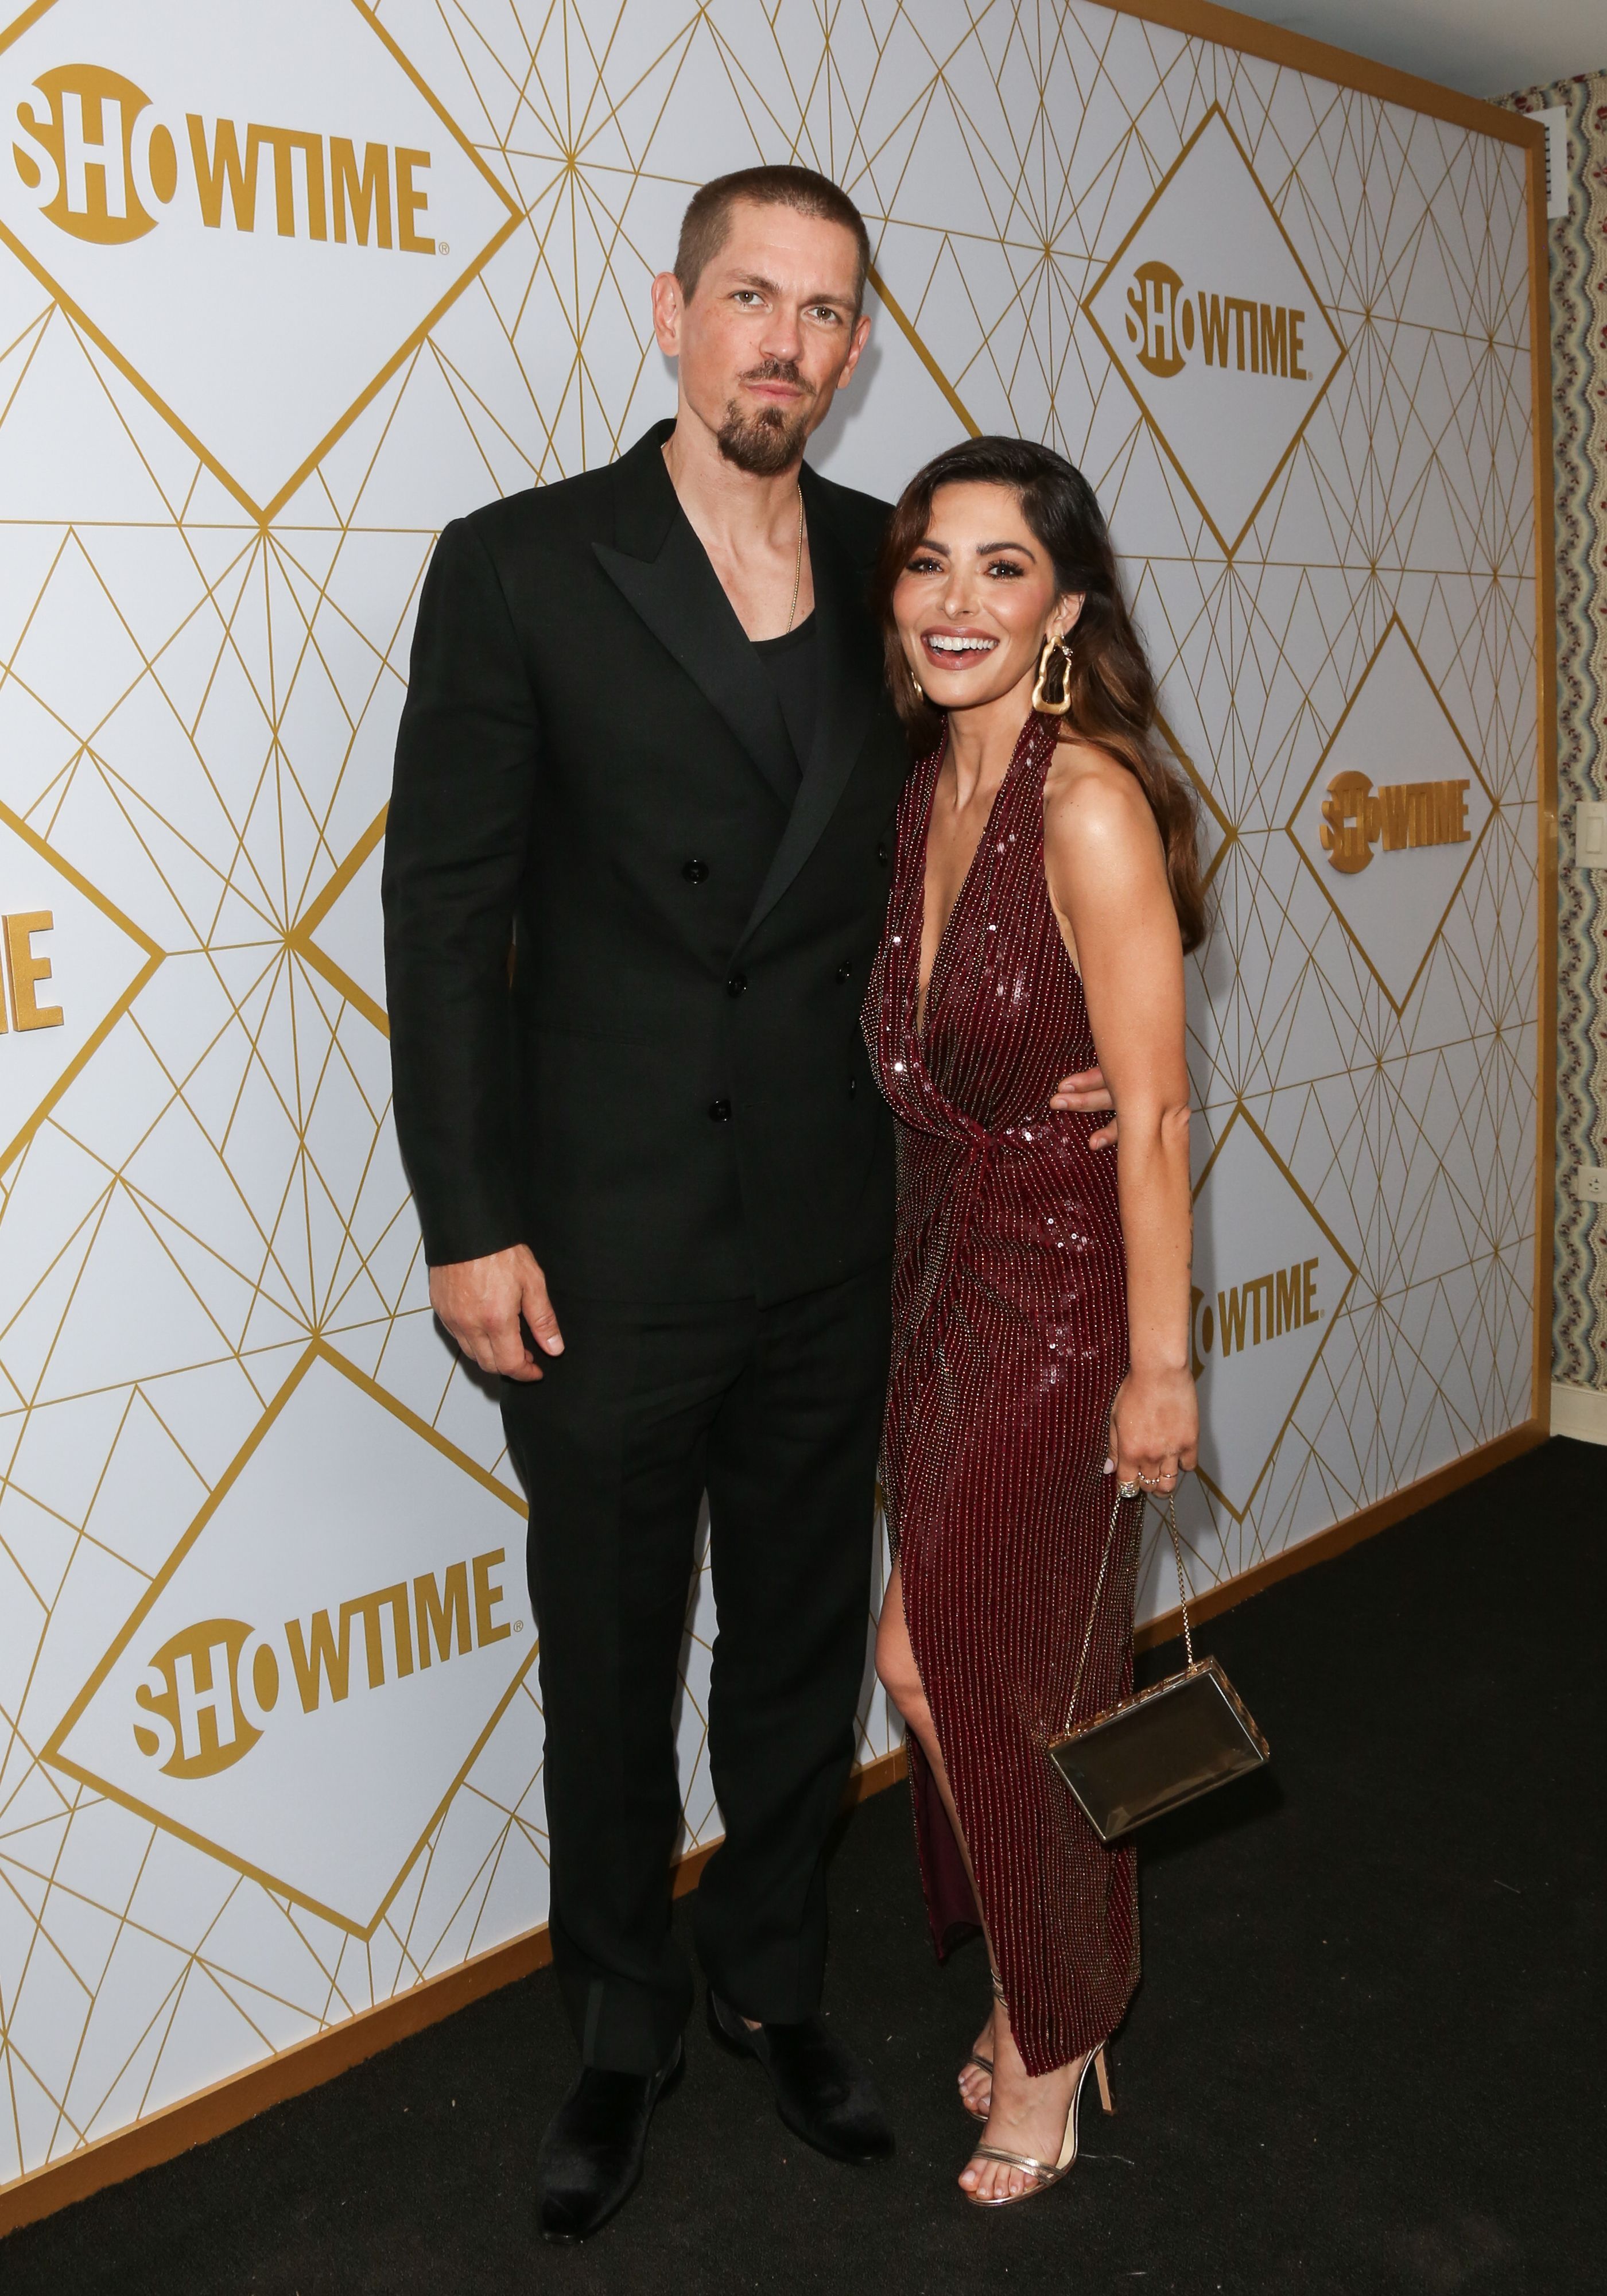 Steve Howey (L) and Sarah Shahi (R) attend the Showtime Emmy eve nominees celebrations at San Vincente Bungalows on September 21, 2019 in West Hollywood, California. | Source: Getty Images